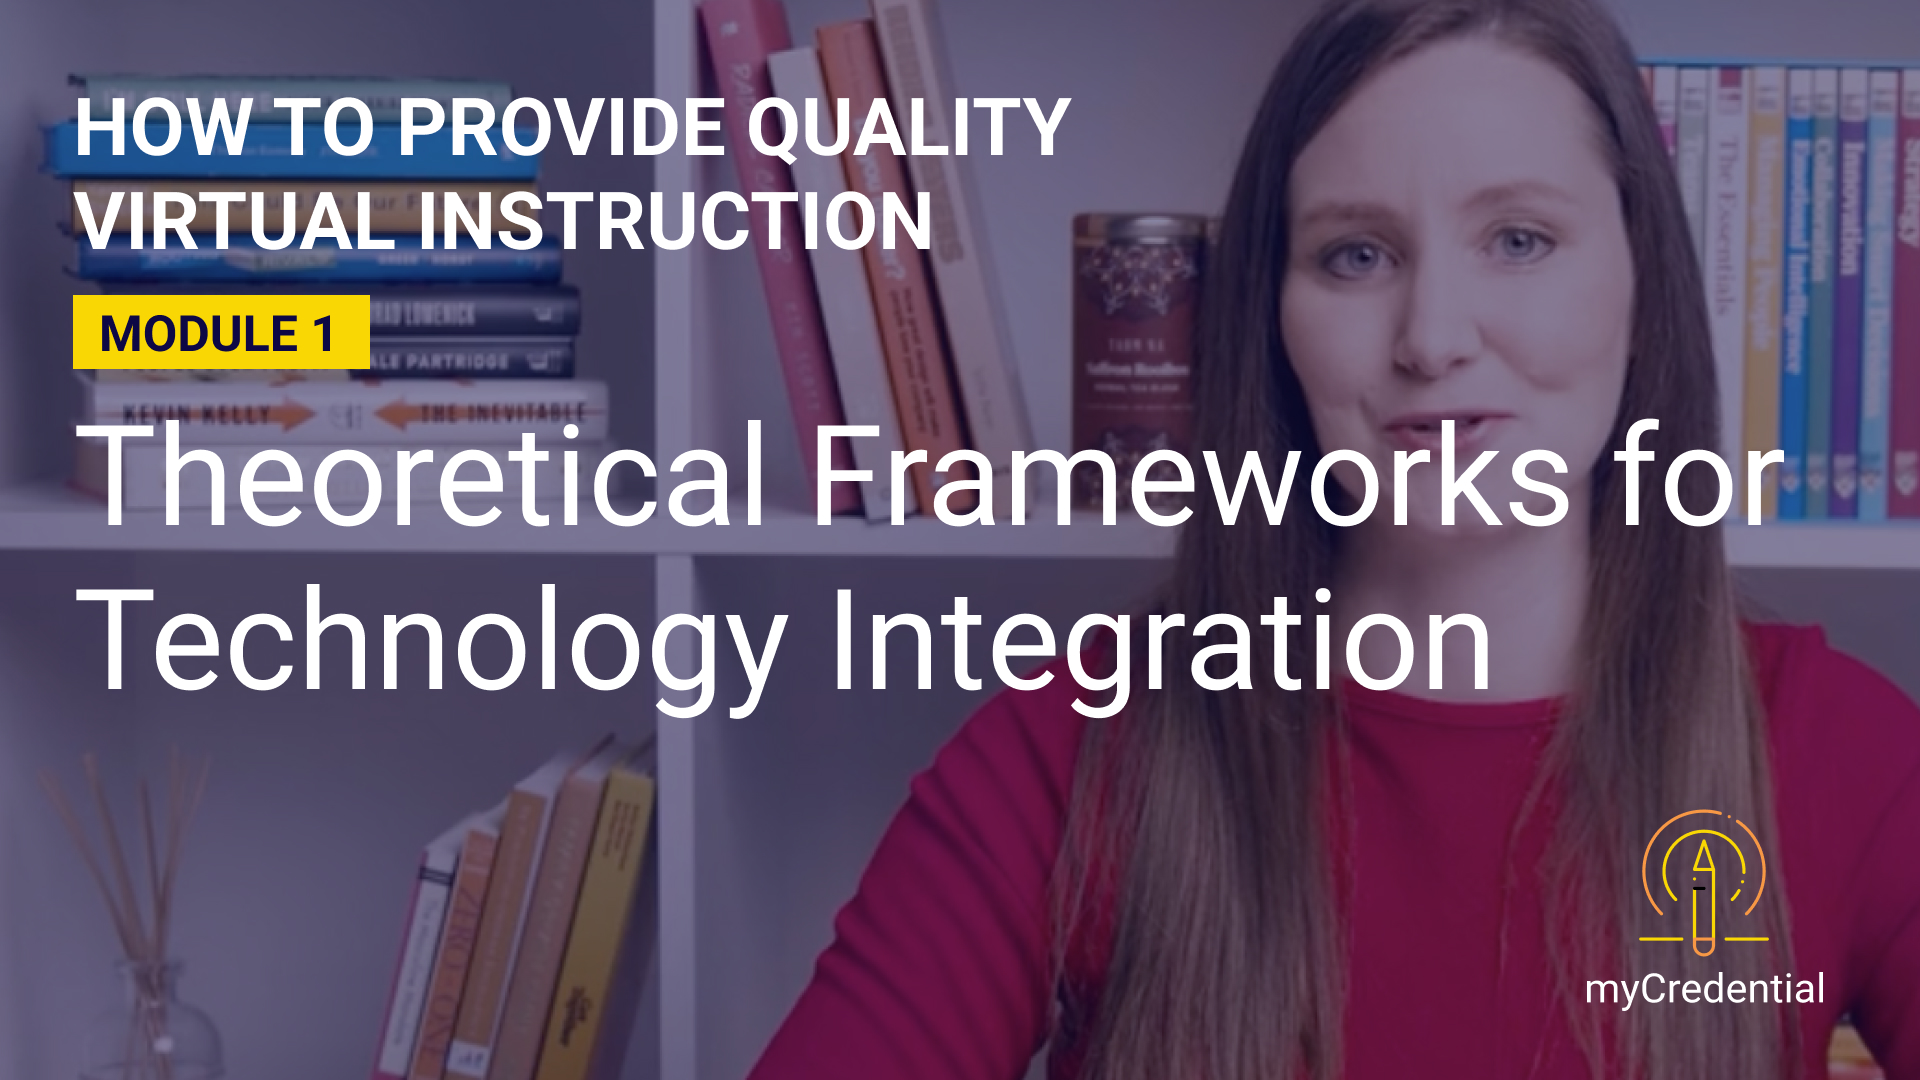 How to Provide Quality Virtual Instruction (Module 1): Theoretical Frameworks for Technology Integration